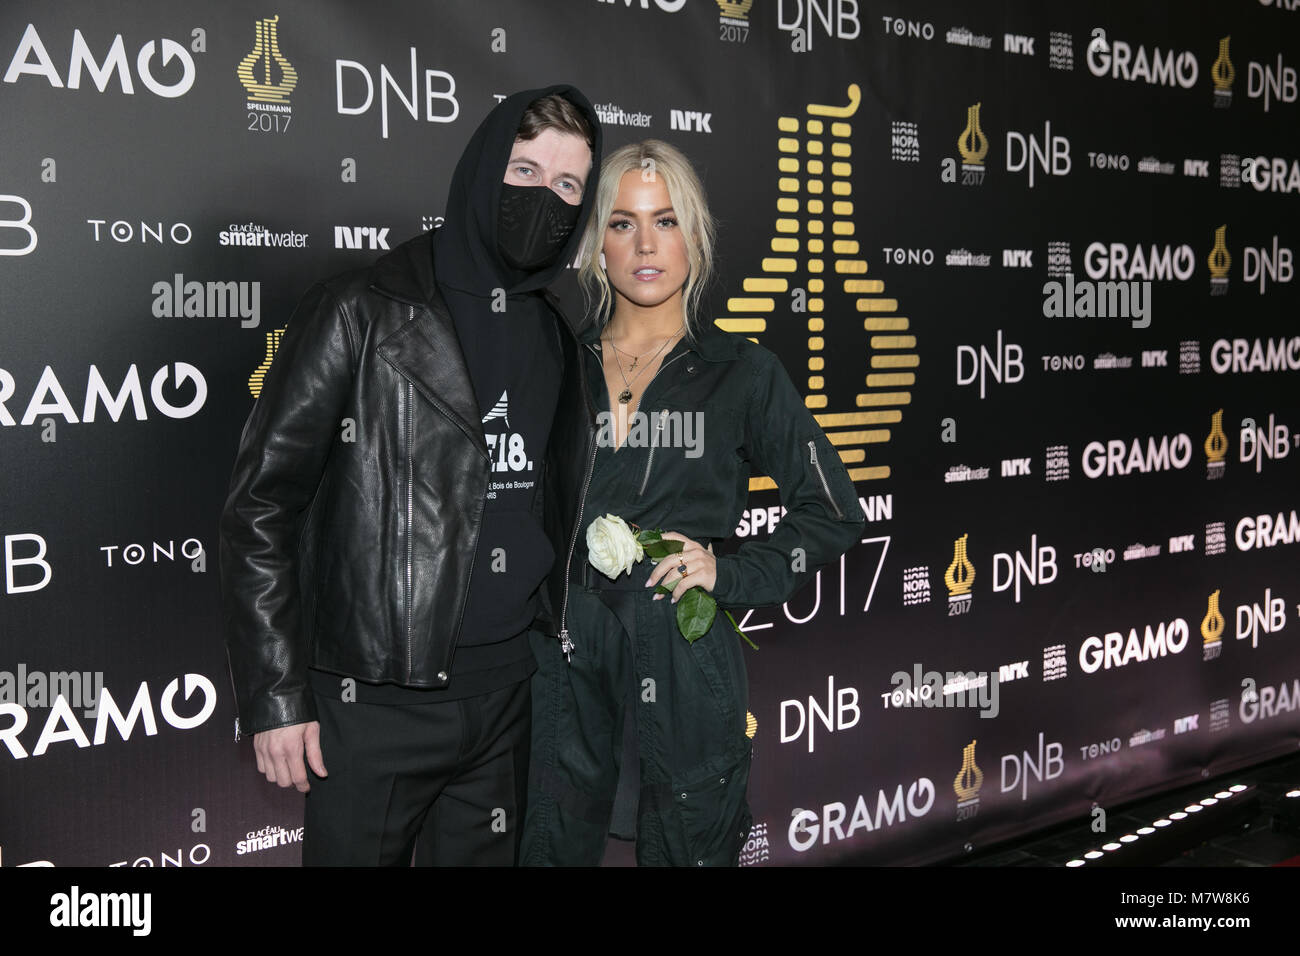 Norway, Oslo - February 25, 2018. The Norwegian record producer Alan Walker  and singer Julie Bergan are seen at the red carpet at the Norwegian Grammy  Awards, Spellemannprisen 2017, in Oslo. (Photo